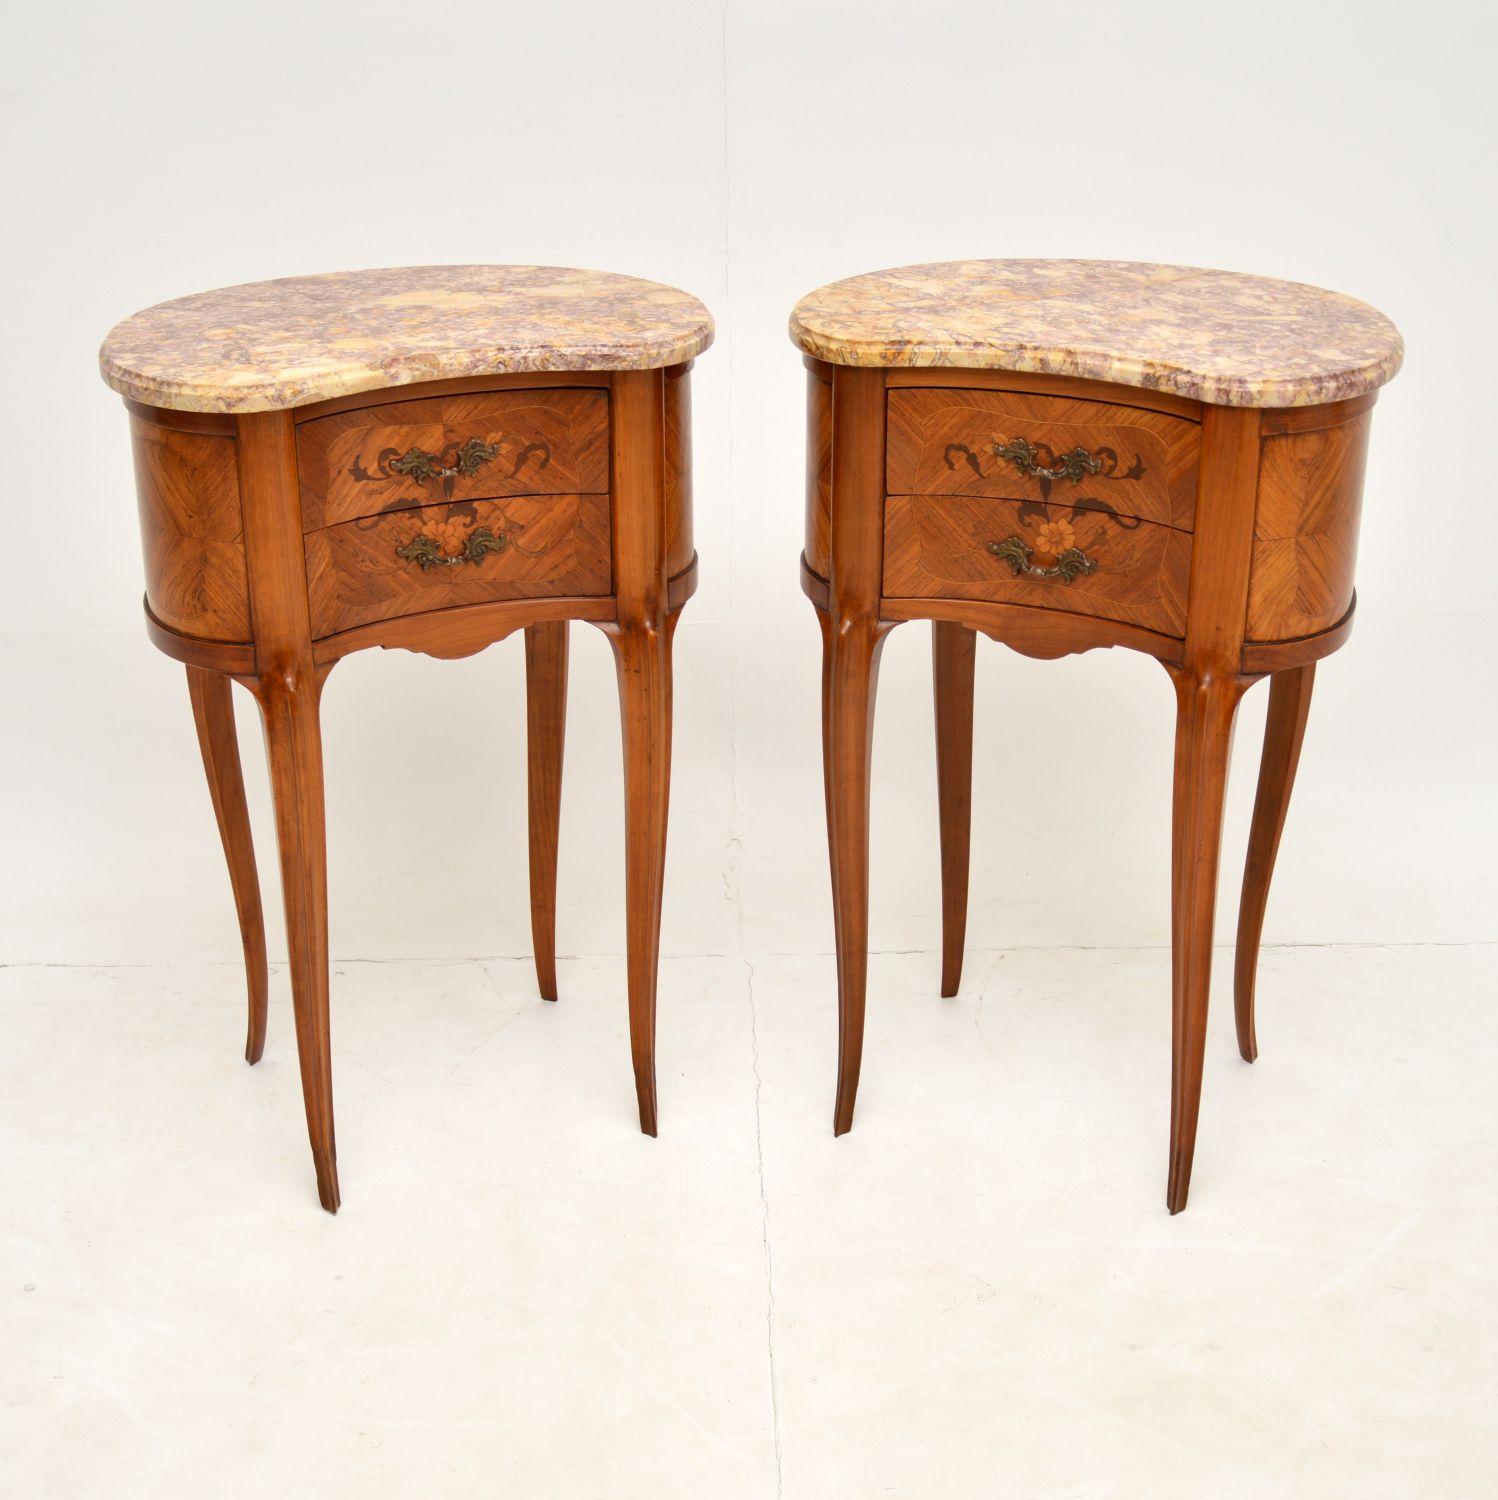 A stunning pair of antique marble top kidney shape side tables. These were made in France, they date from the 1900-1910 period.

Beautifully made from inlaid wood with floral marquetry, the quality of construction is excellent. The original marble